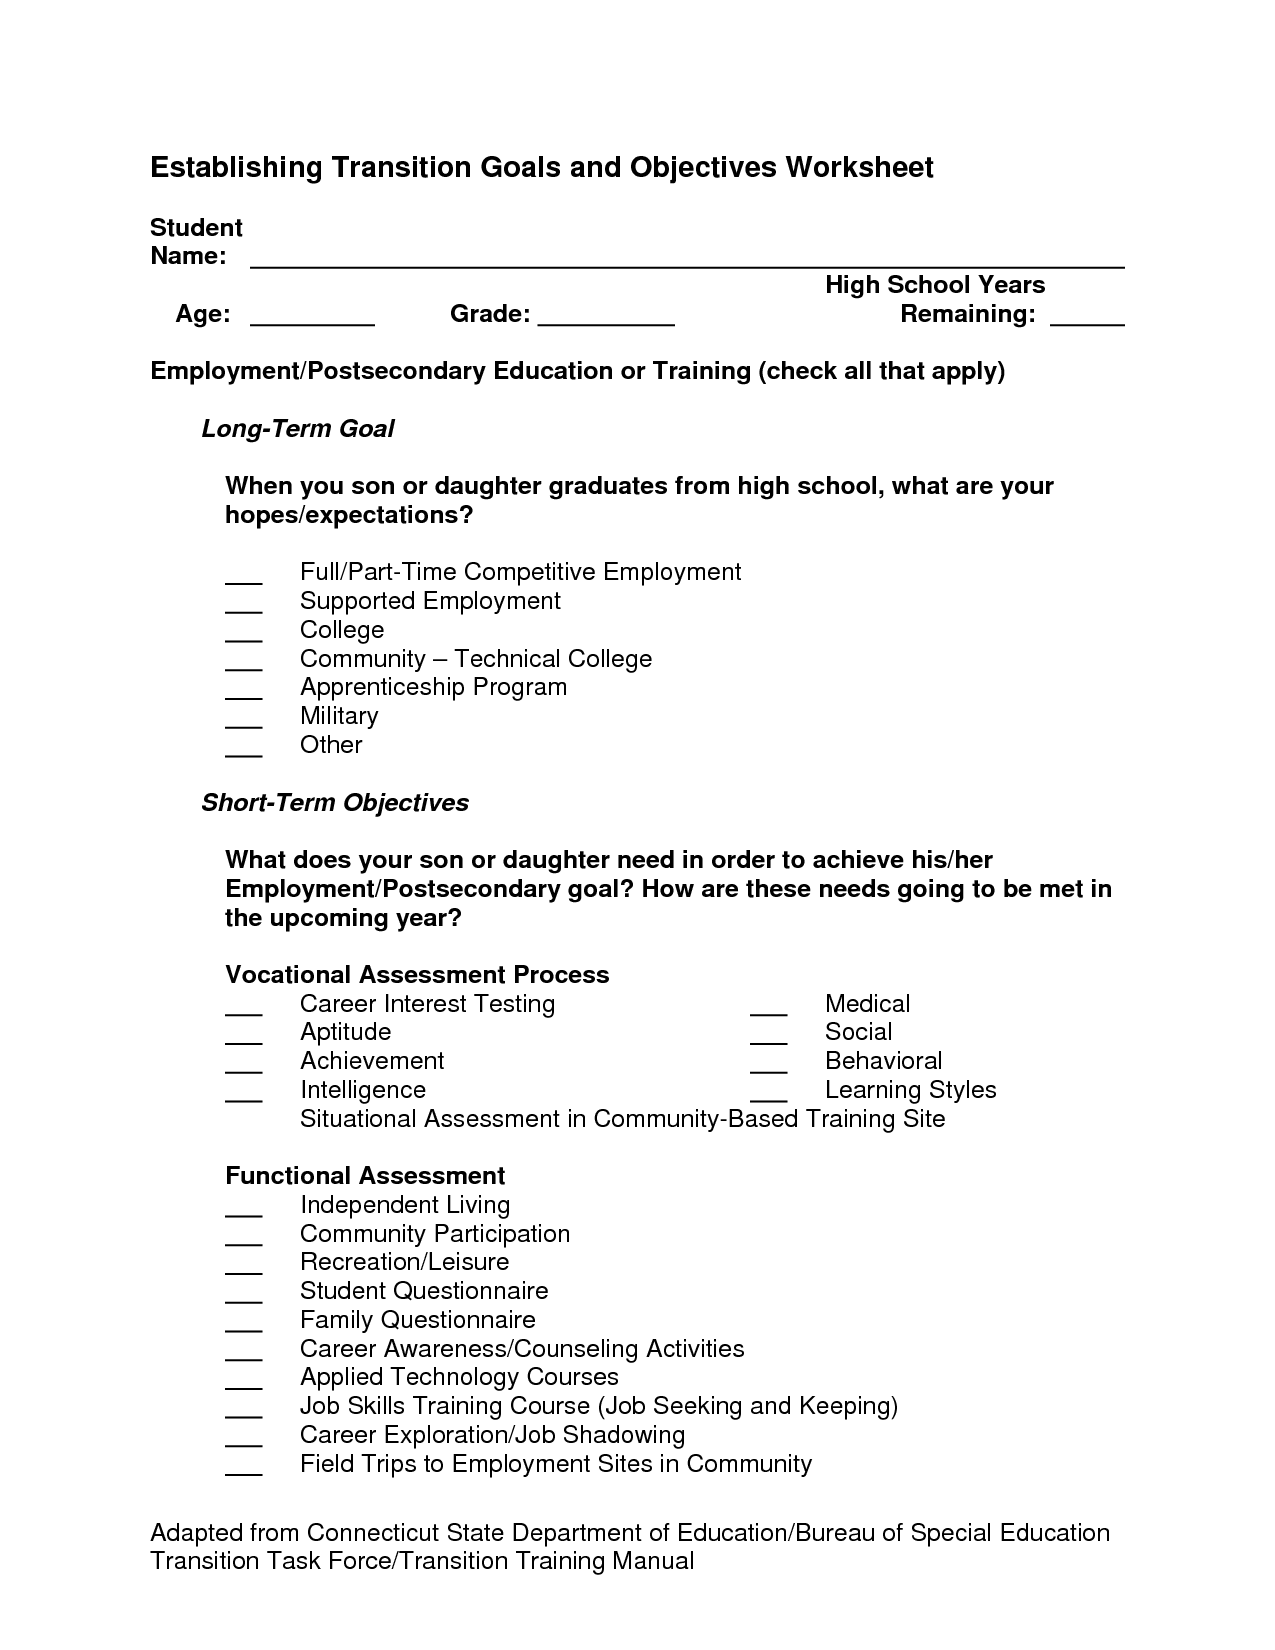 13-best-images-of-healthy-living-worksheets-for-adults-free-printable-life-skills-worksheets